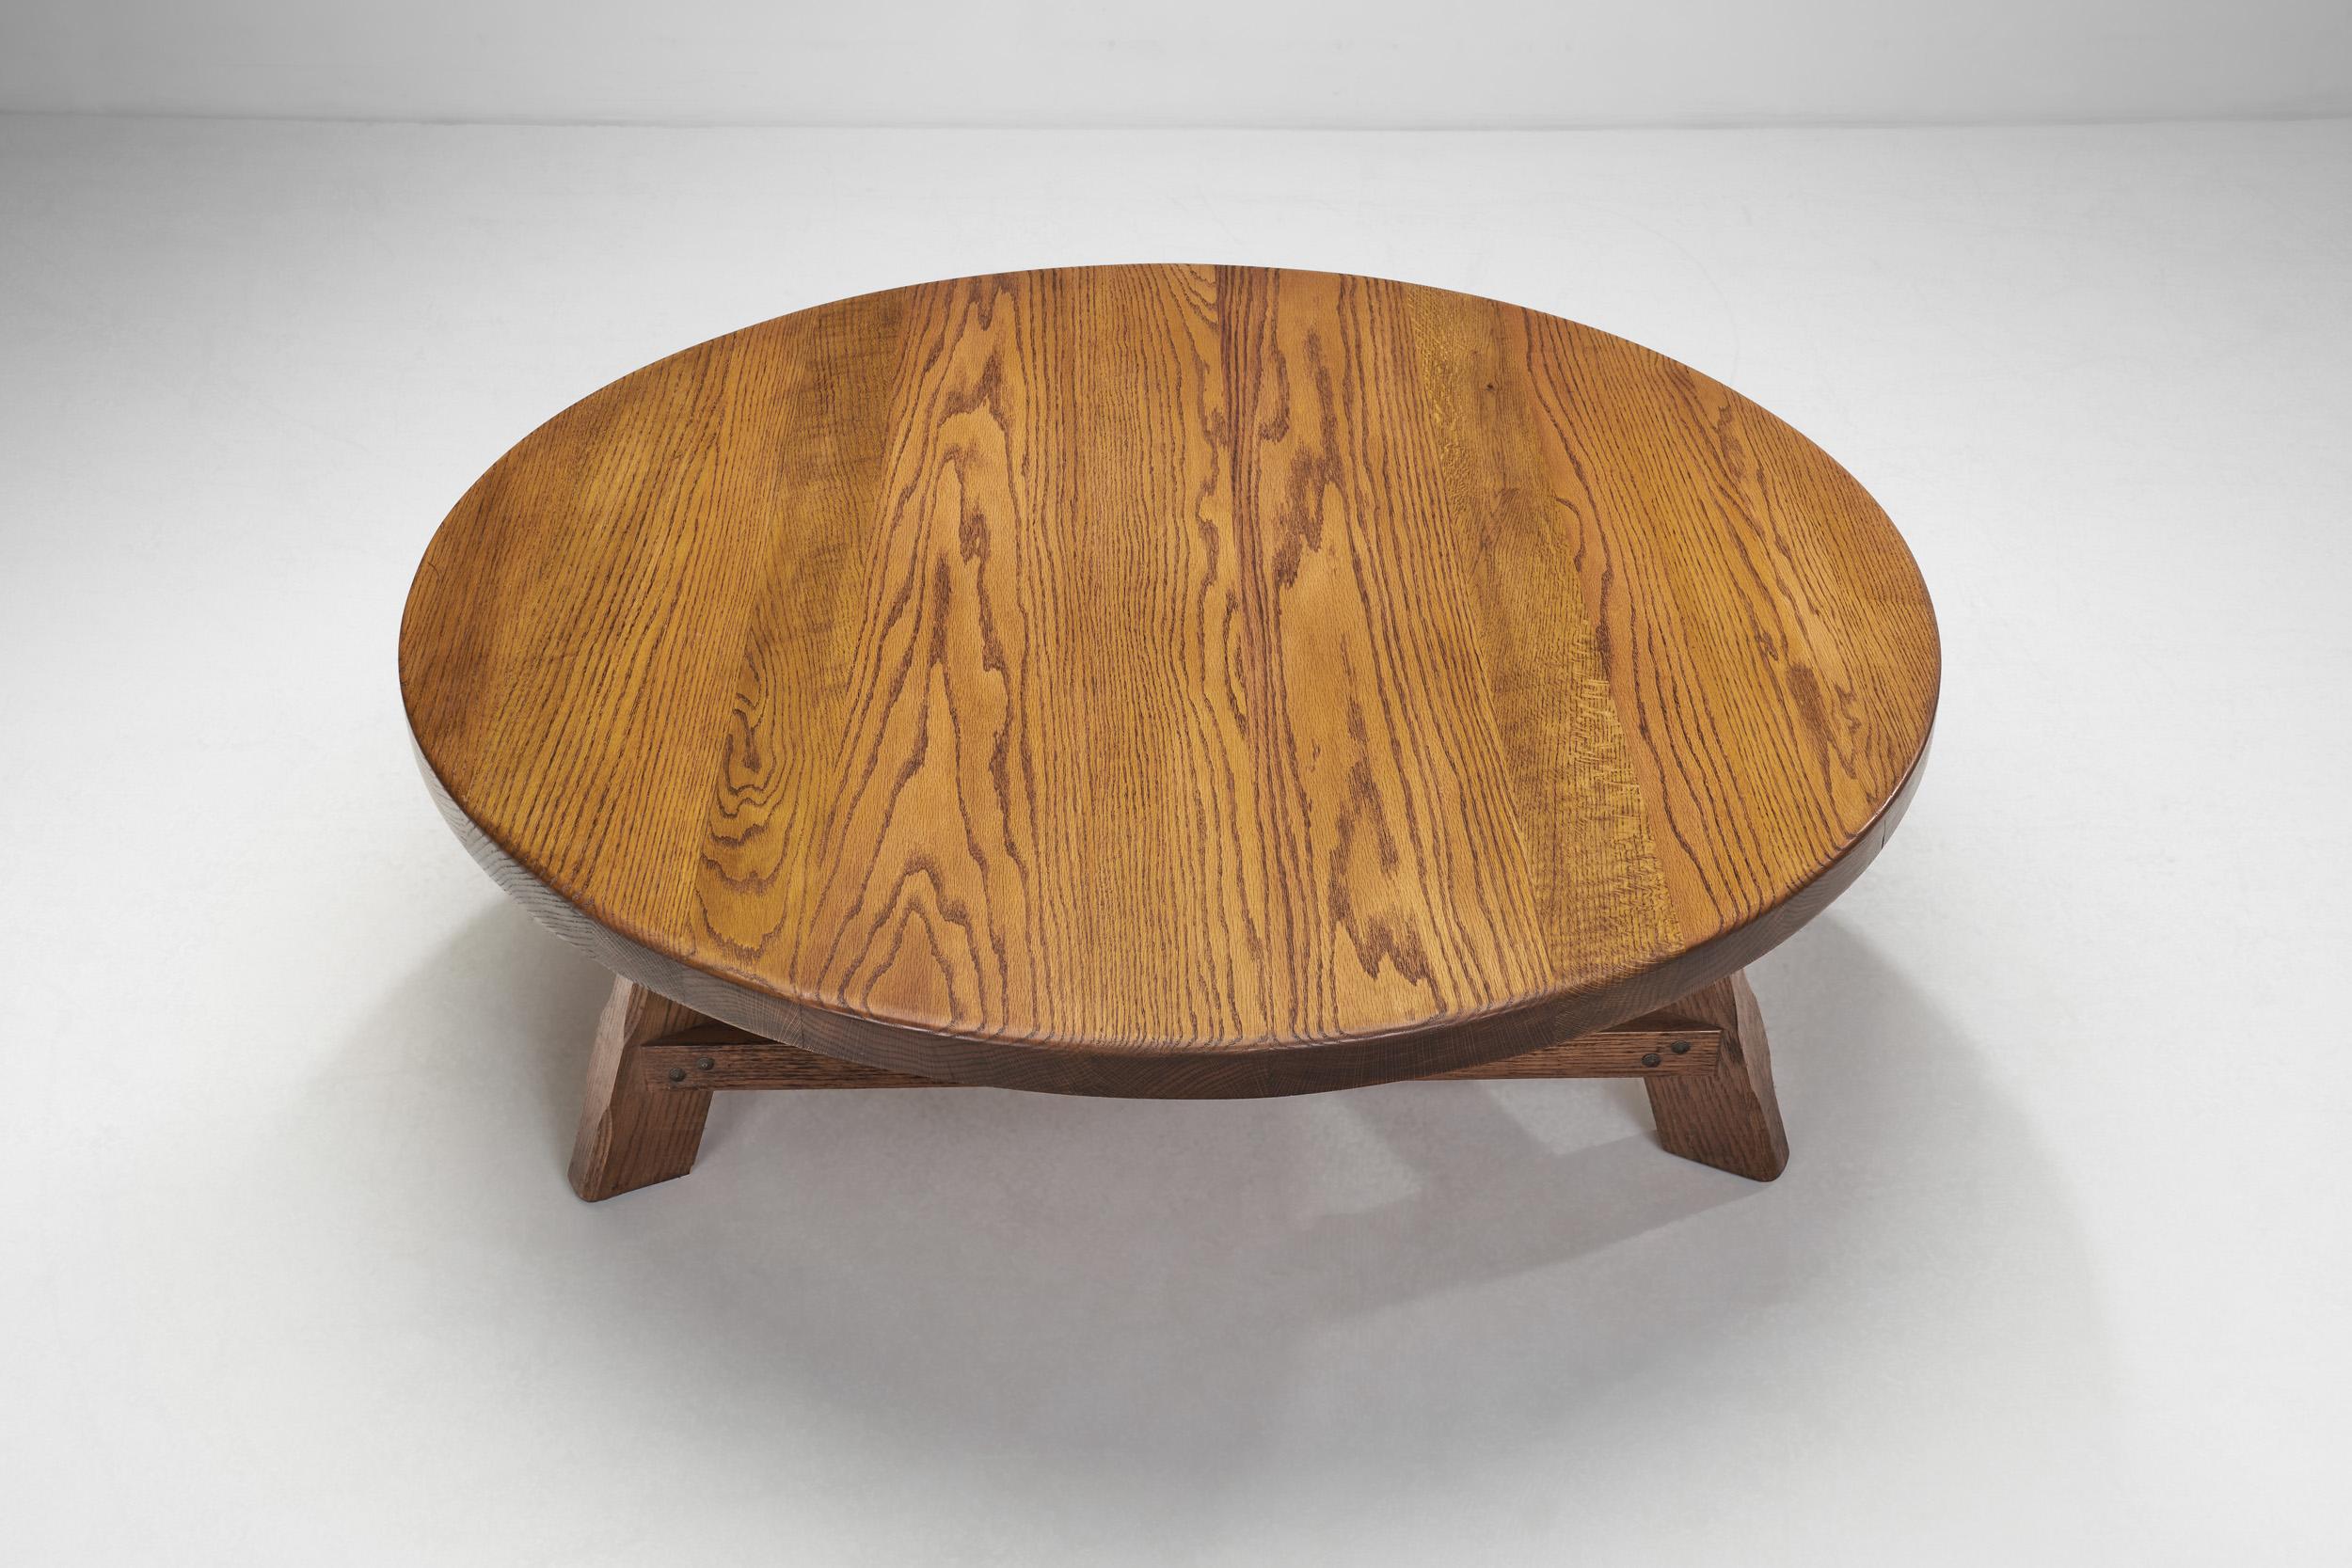 Brutalist Oak Coffee Table with Triangular Legs, Europe ca 1950s For Sale 1